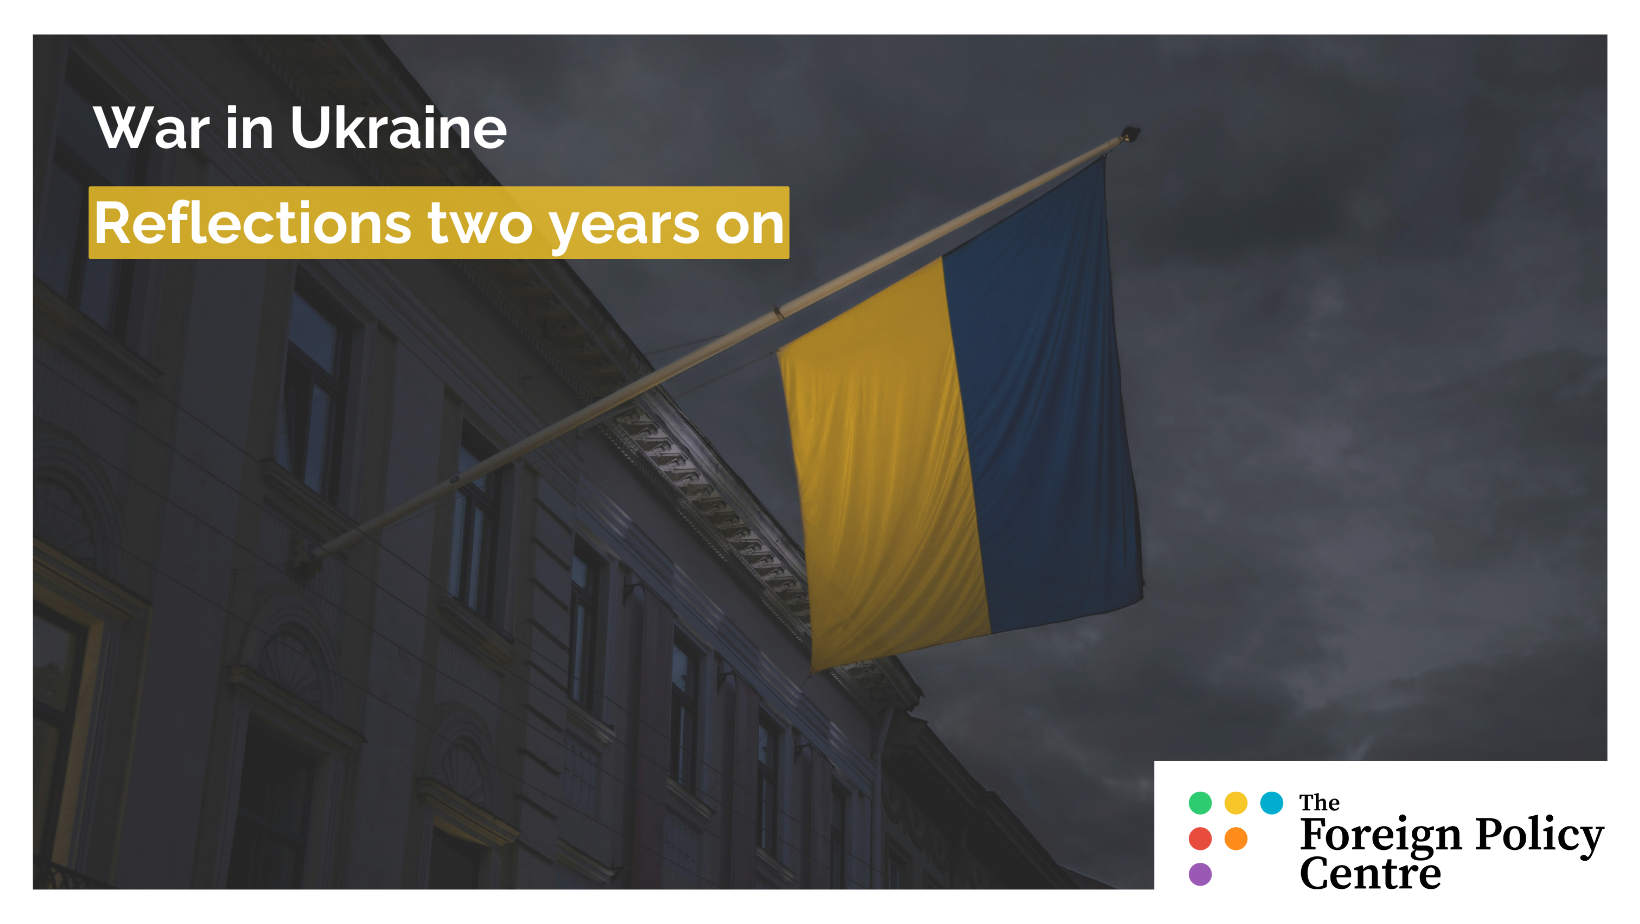 War in Ukraine: Reflections two years on